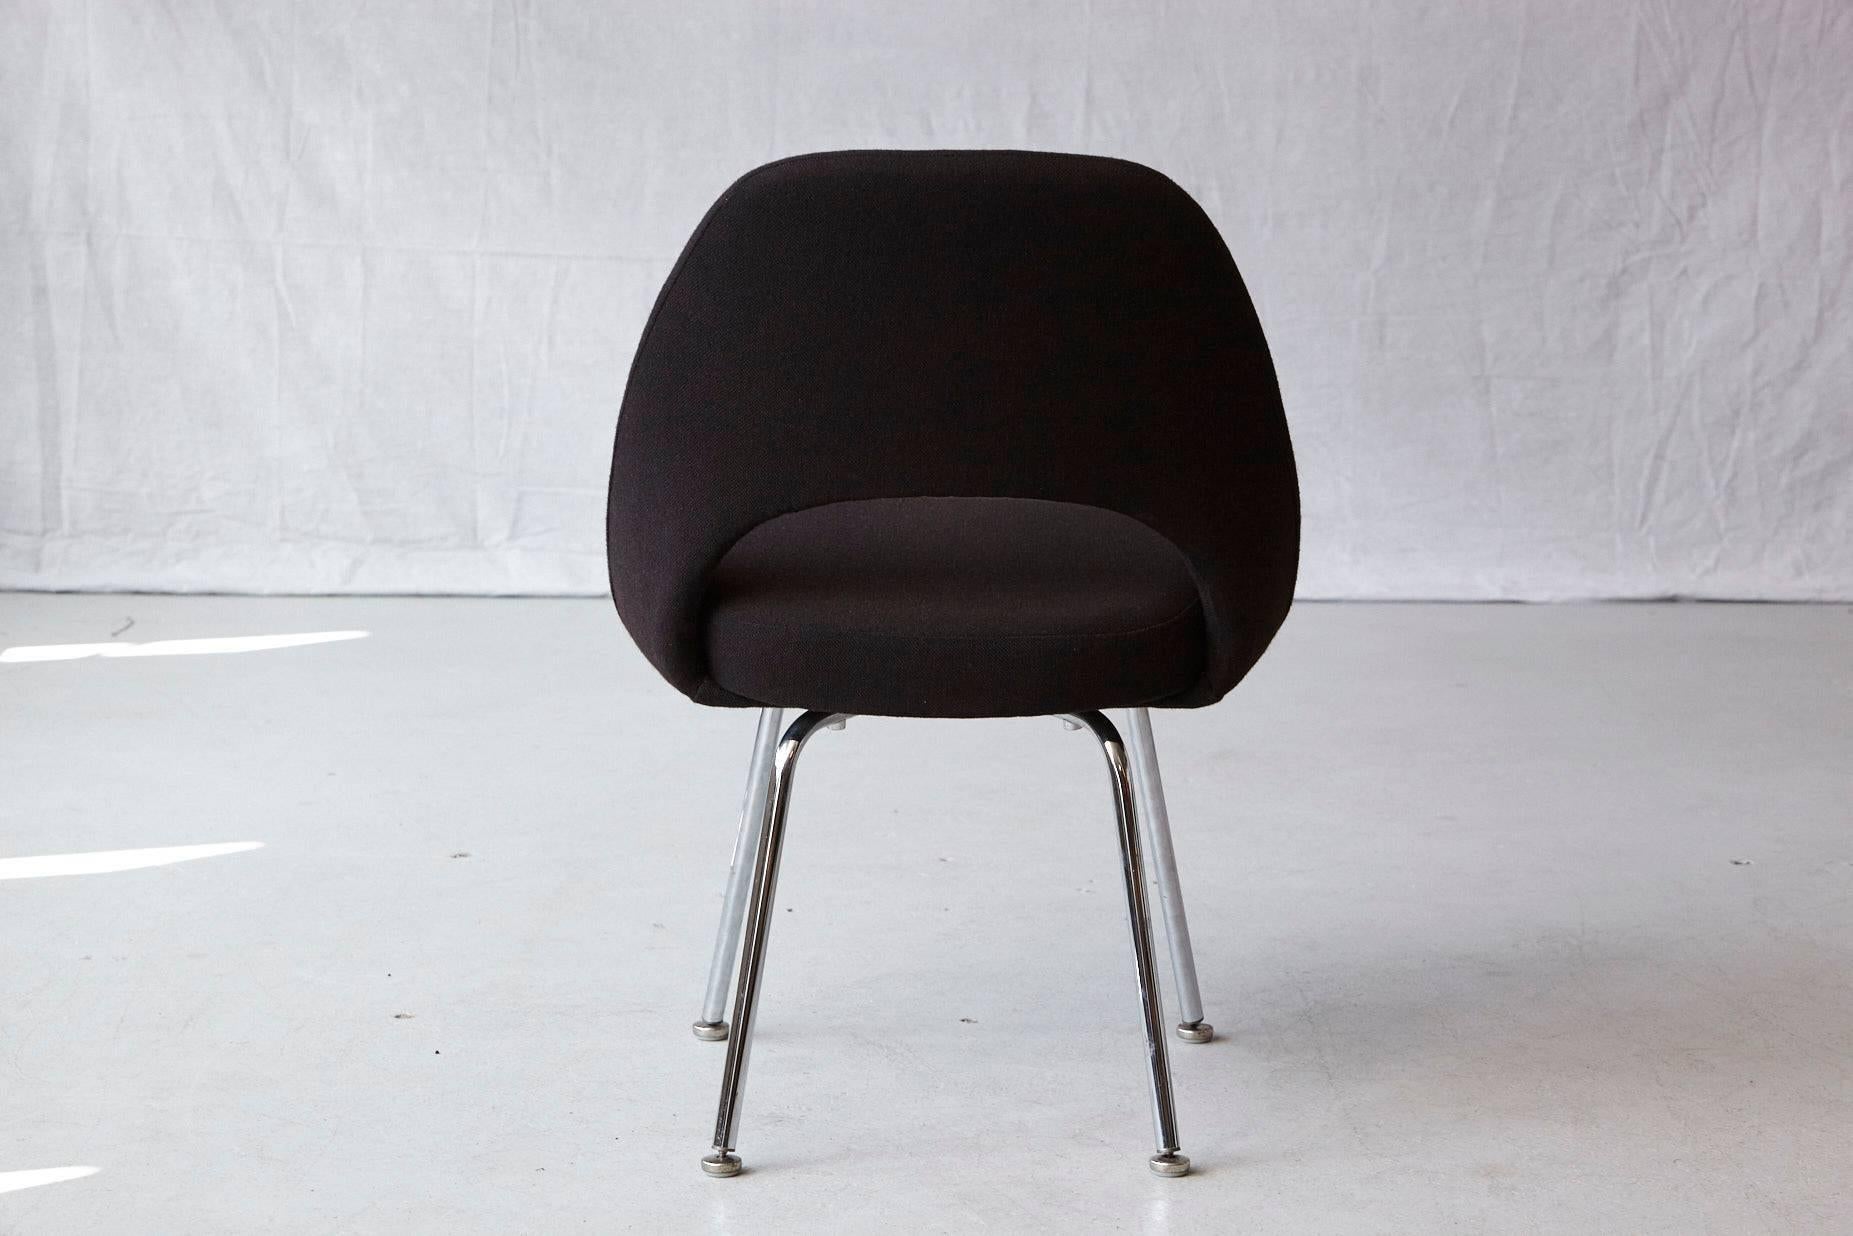 Black Eero Saarinen Series 71 Armless Chair for Knoll International In Good Condition For Sale In Aramits, Nouvelle-Aquitaine